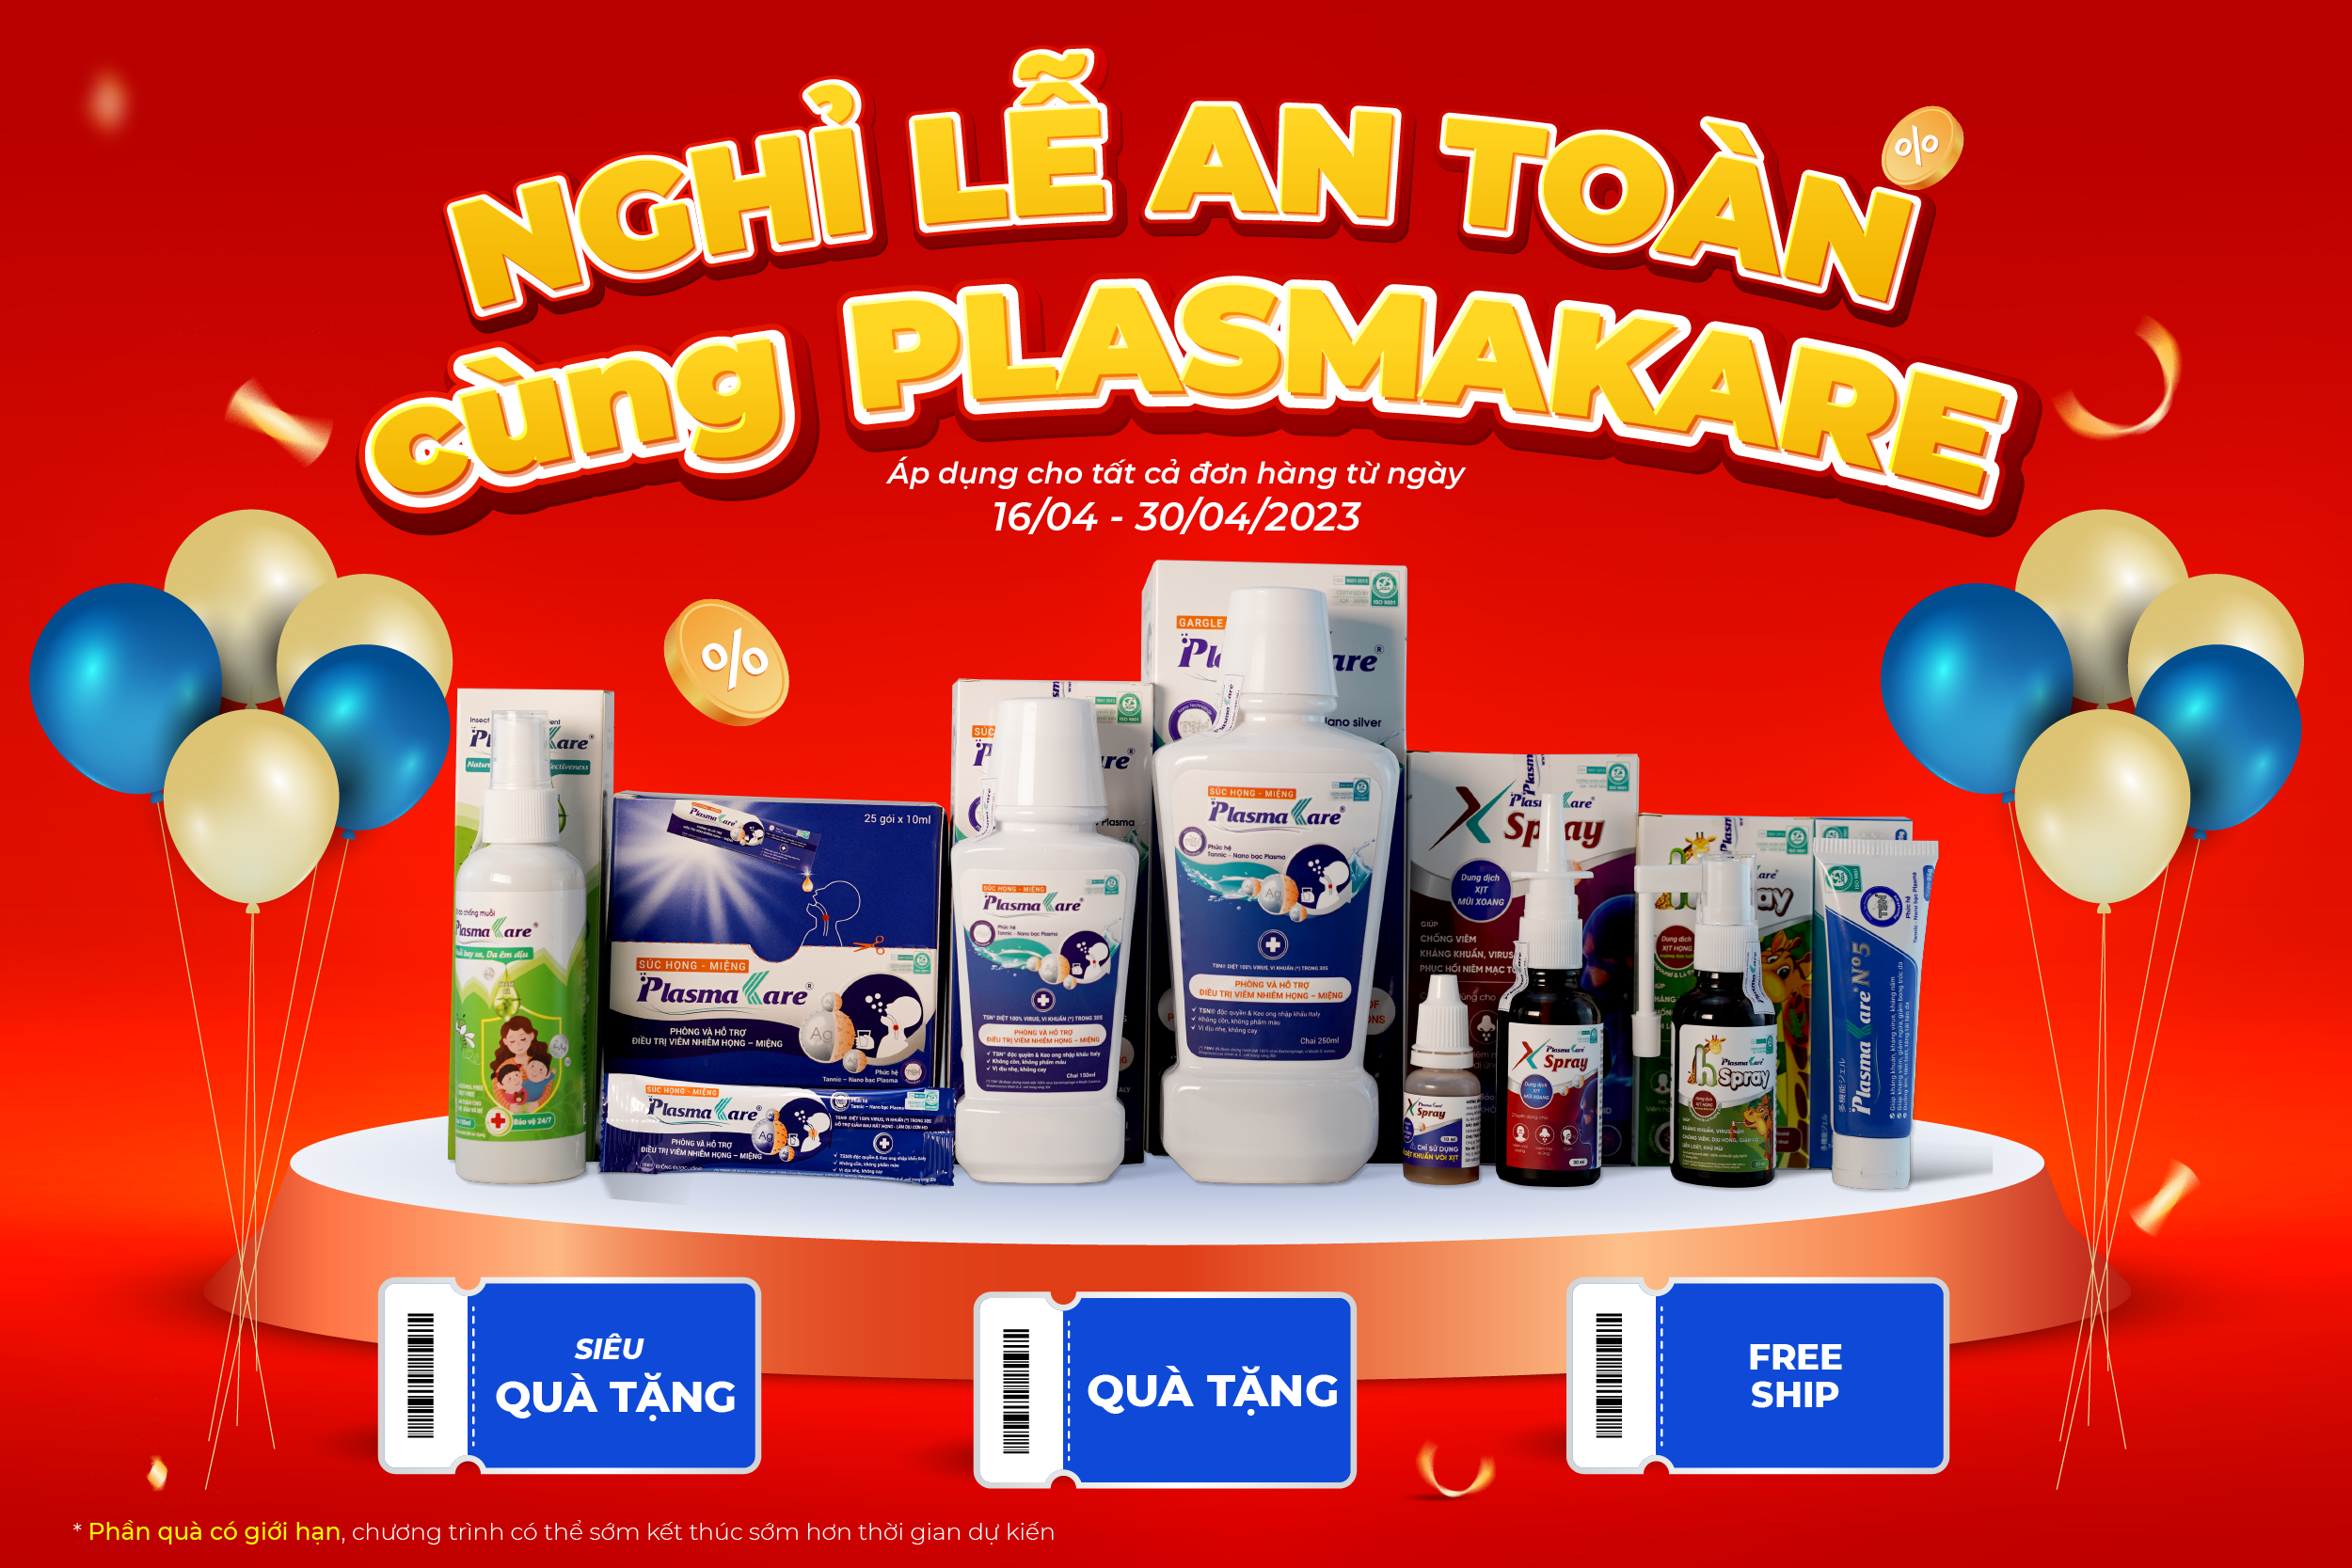 nghi-le-an-toan-cung-plasmakare-01